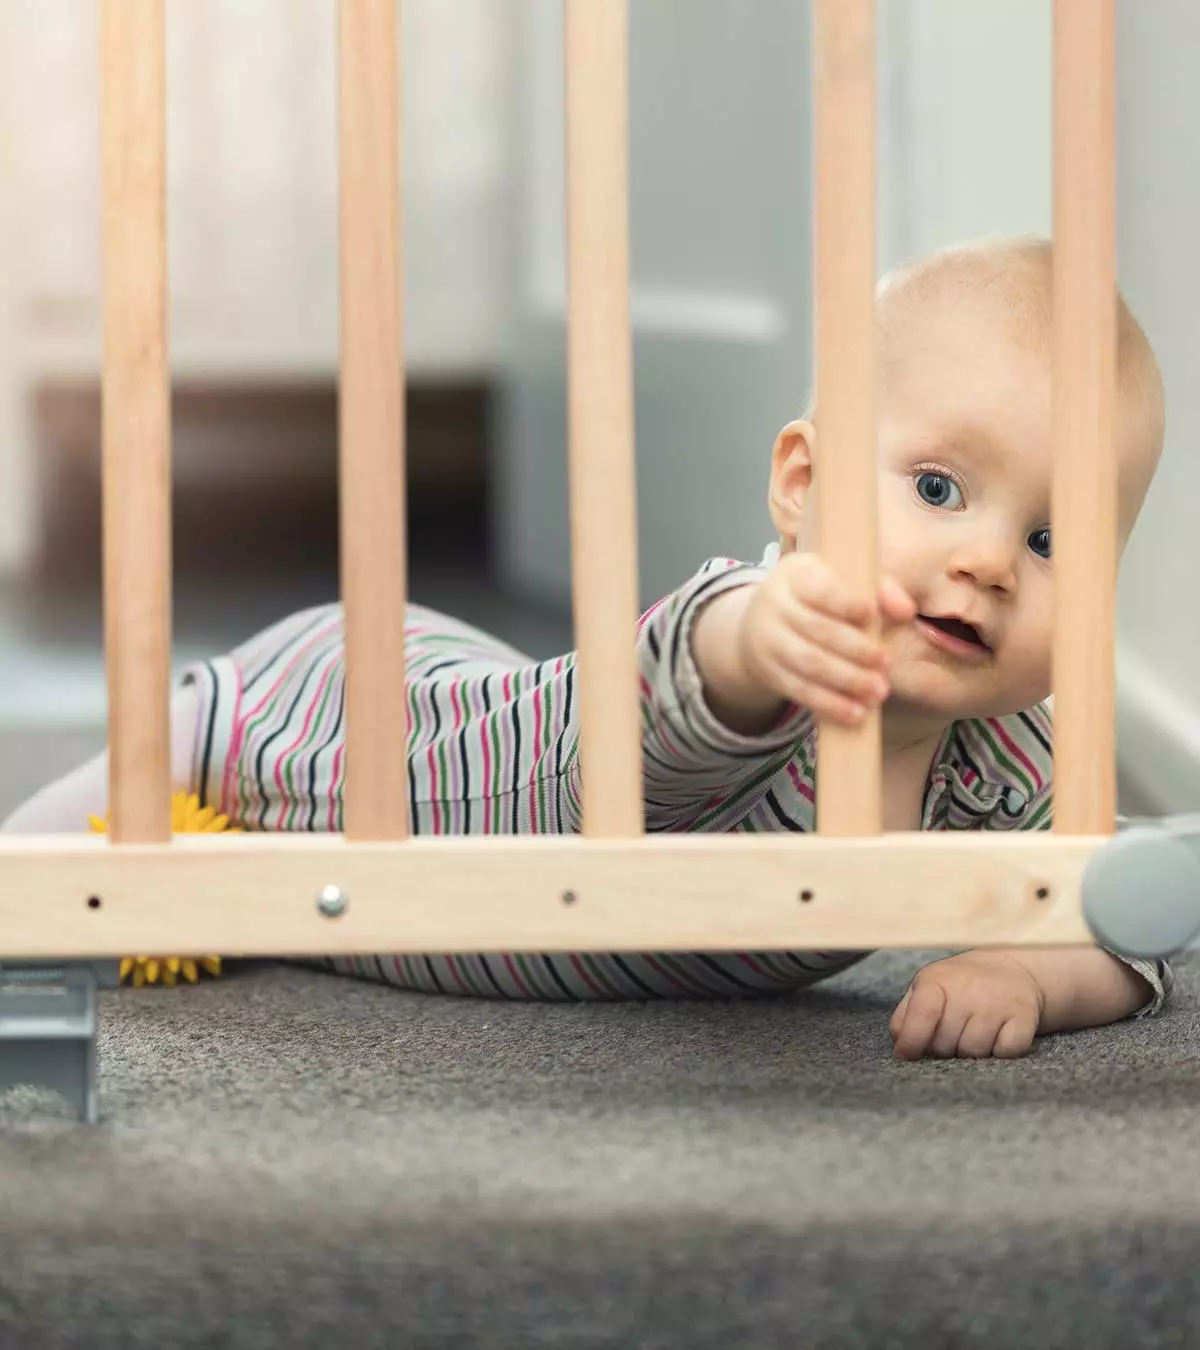 Planning To Get A Baby Gate? Here’s What You Need To Know